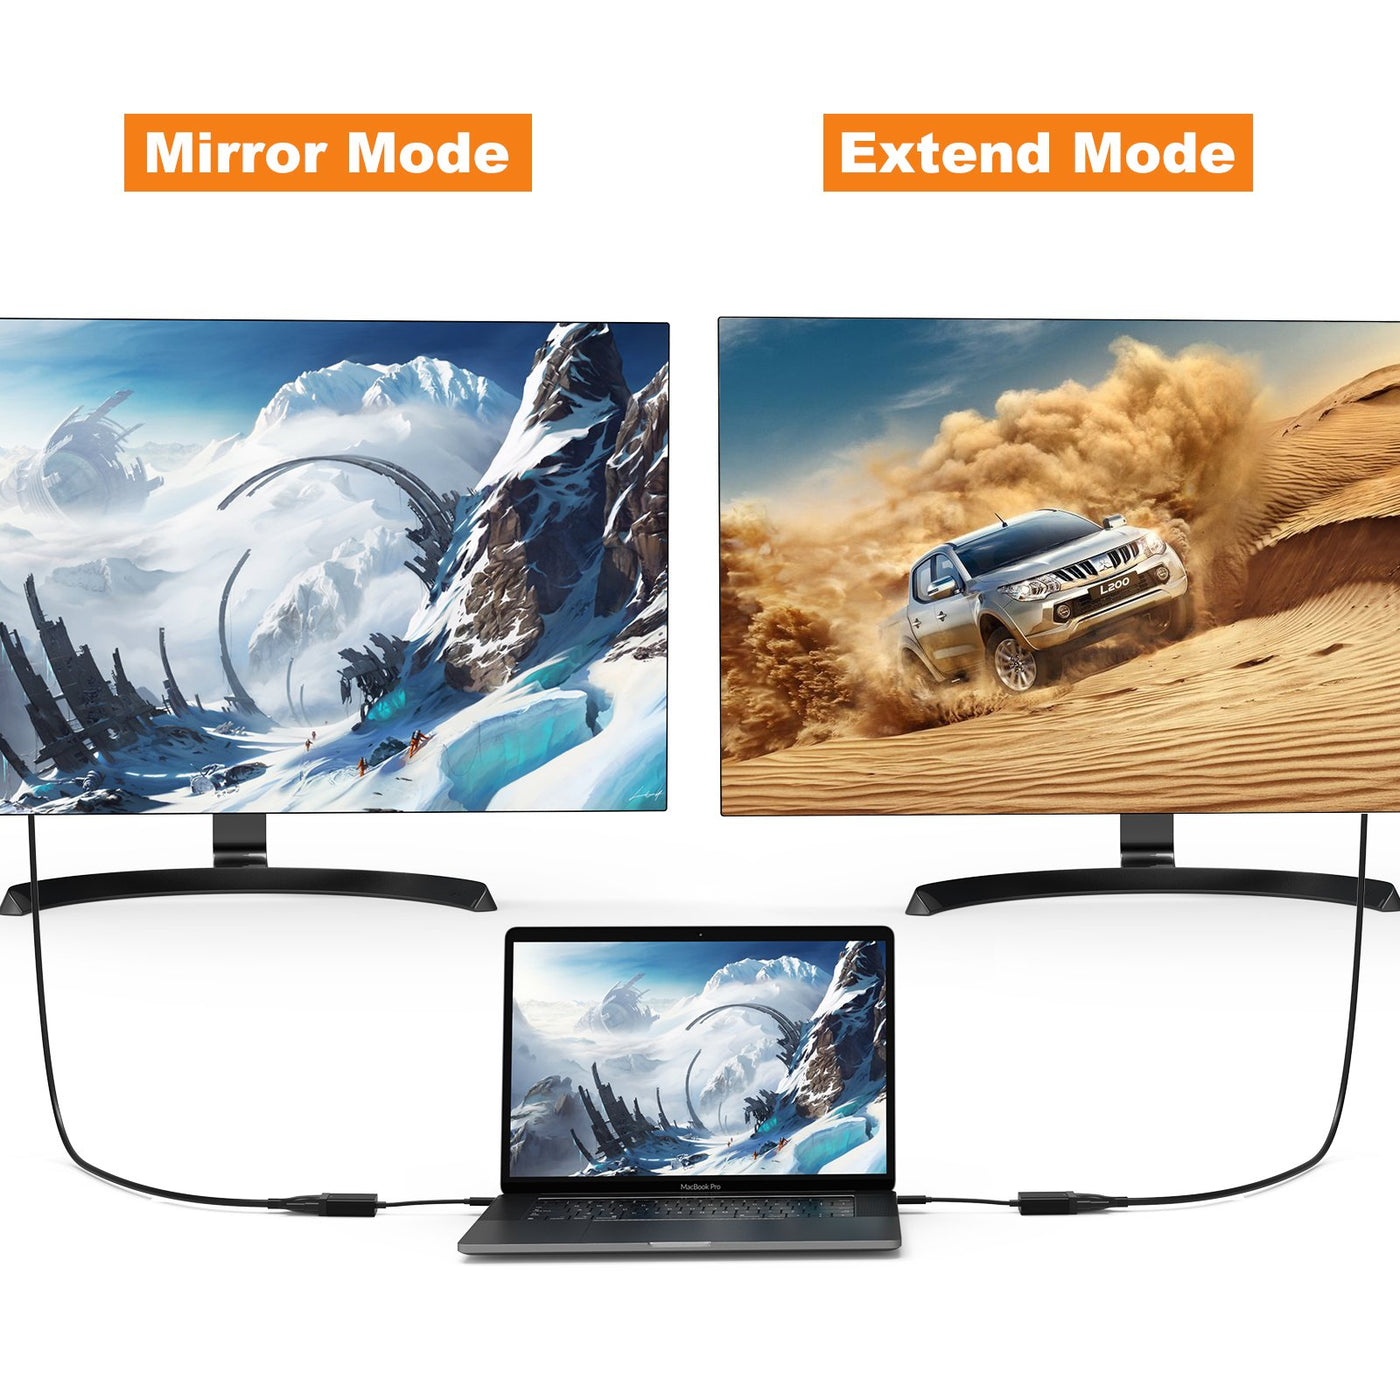 VGA adapter supports mirror & extend dual mode